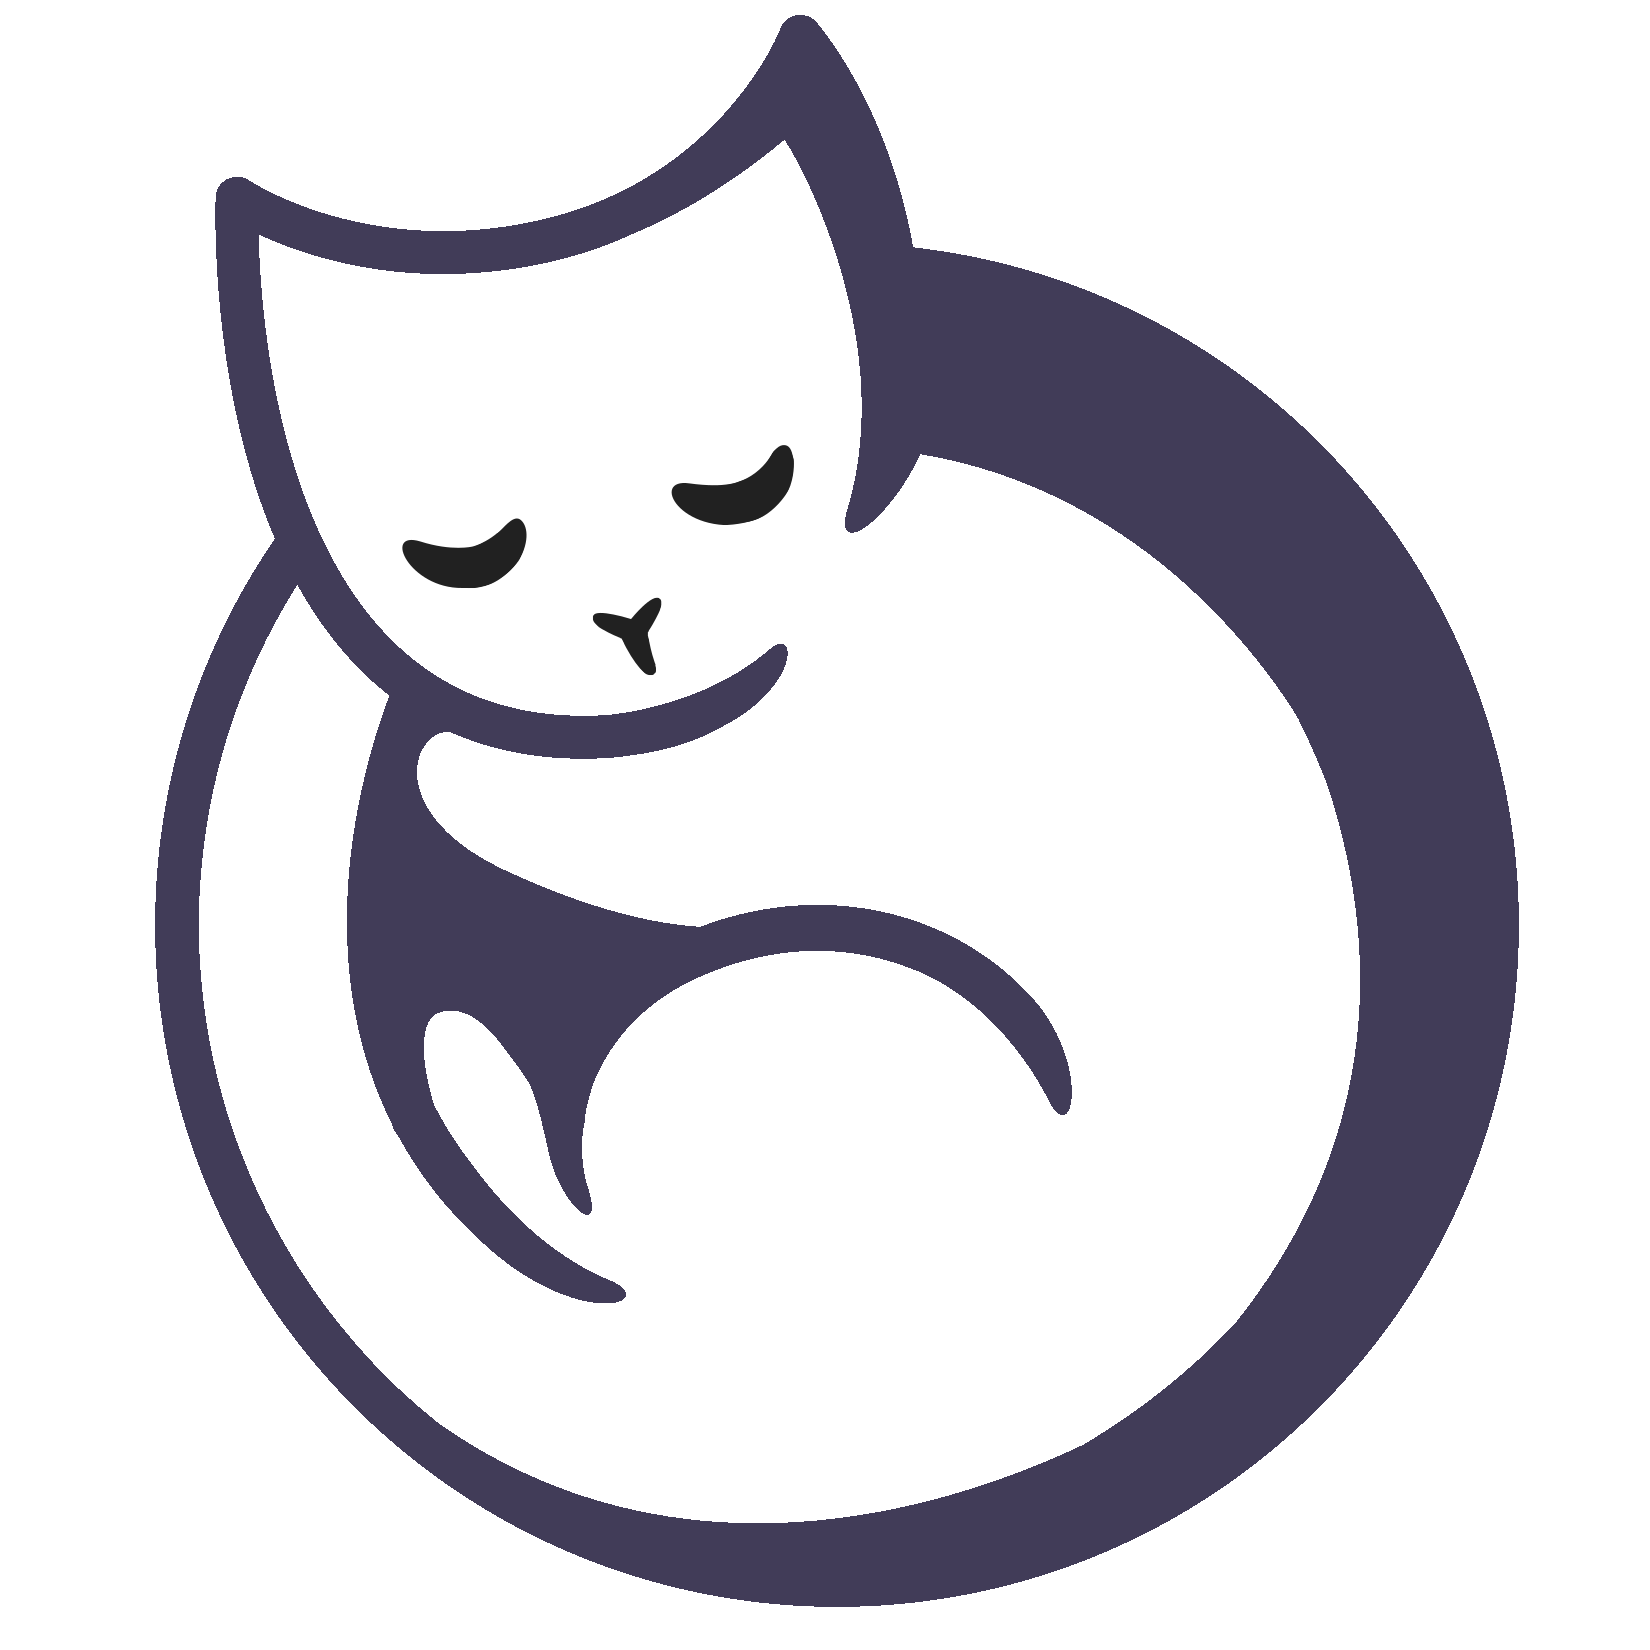 Purrly Digital logo: A sleeping cat wrapped in a near circle with its tail.